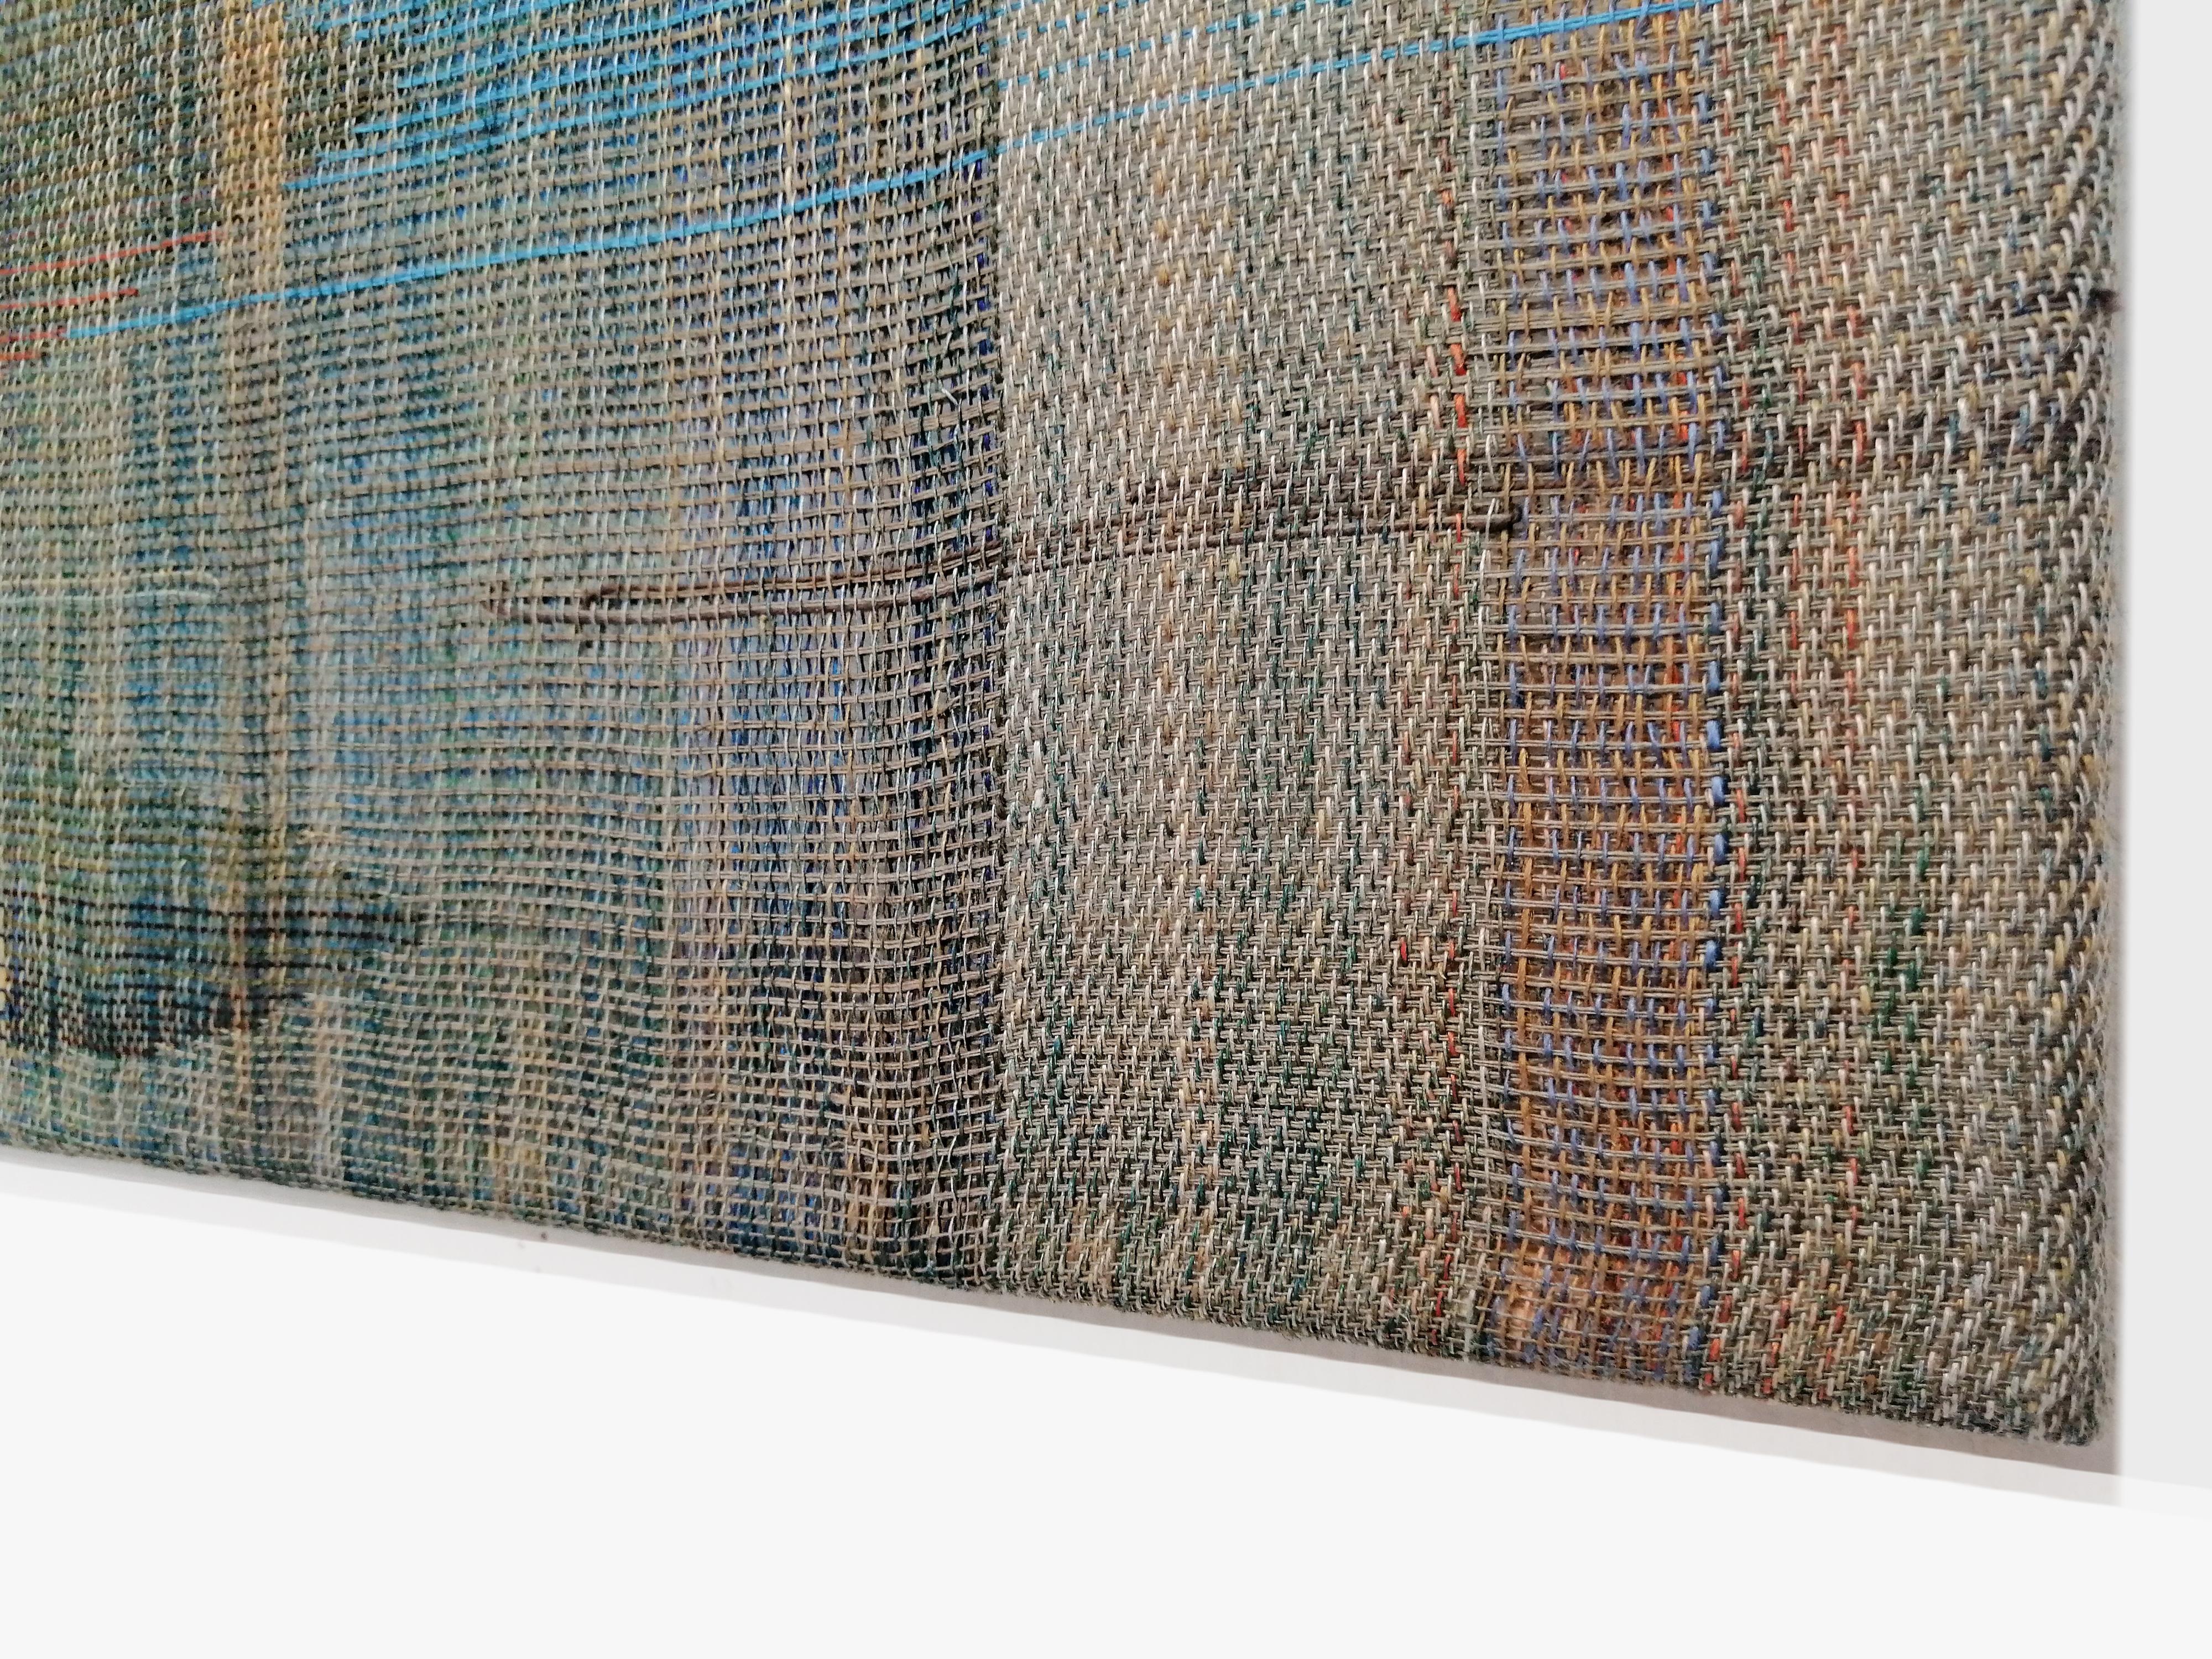 In Between Words 2', from the series 'Horizons’ 2021
Handwoven painting, linen, cotton yarn, acrylic textile paint, 65 x 50 cm.

‘Horizons’ are a symbiosis of two disciplines of art, Painting and Weaving. Handwoven canvases are entirely created on a